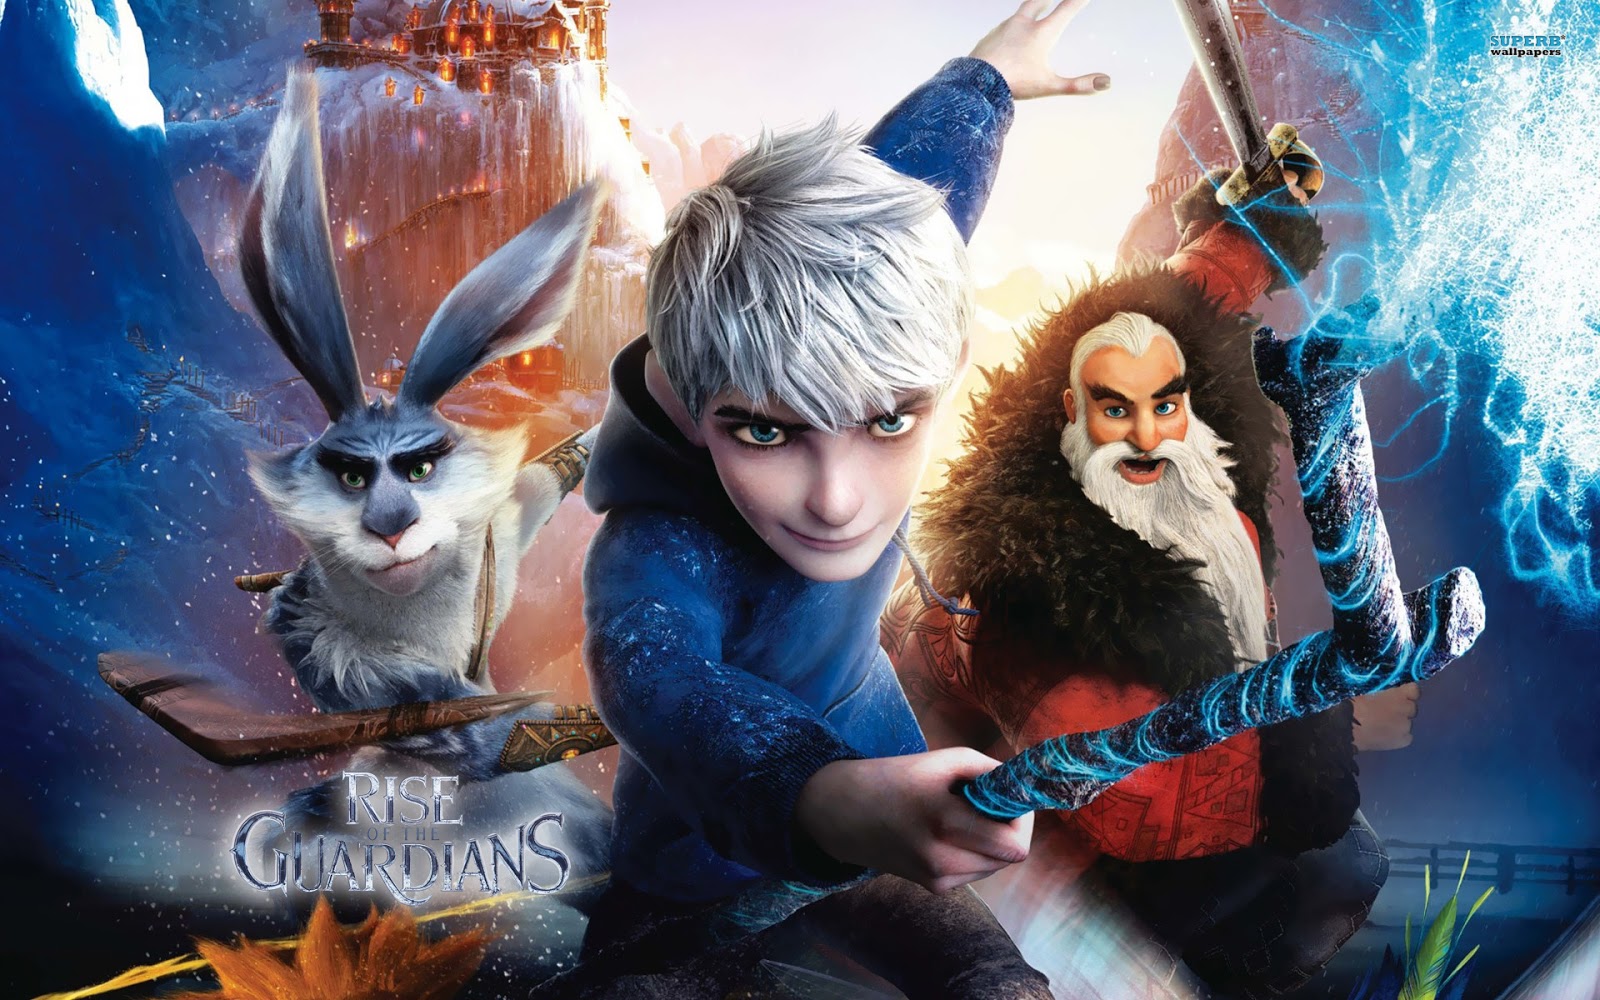 Download Rise of the Guardians High Quality